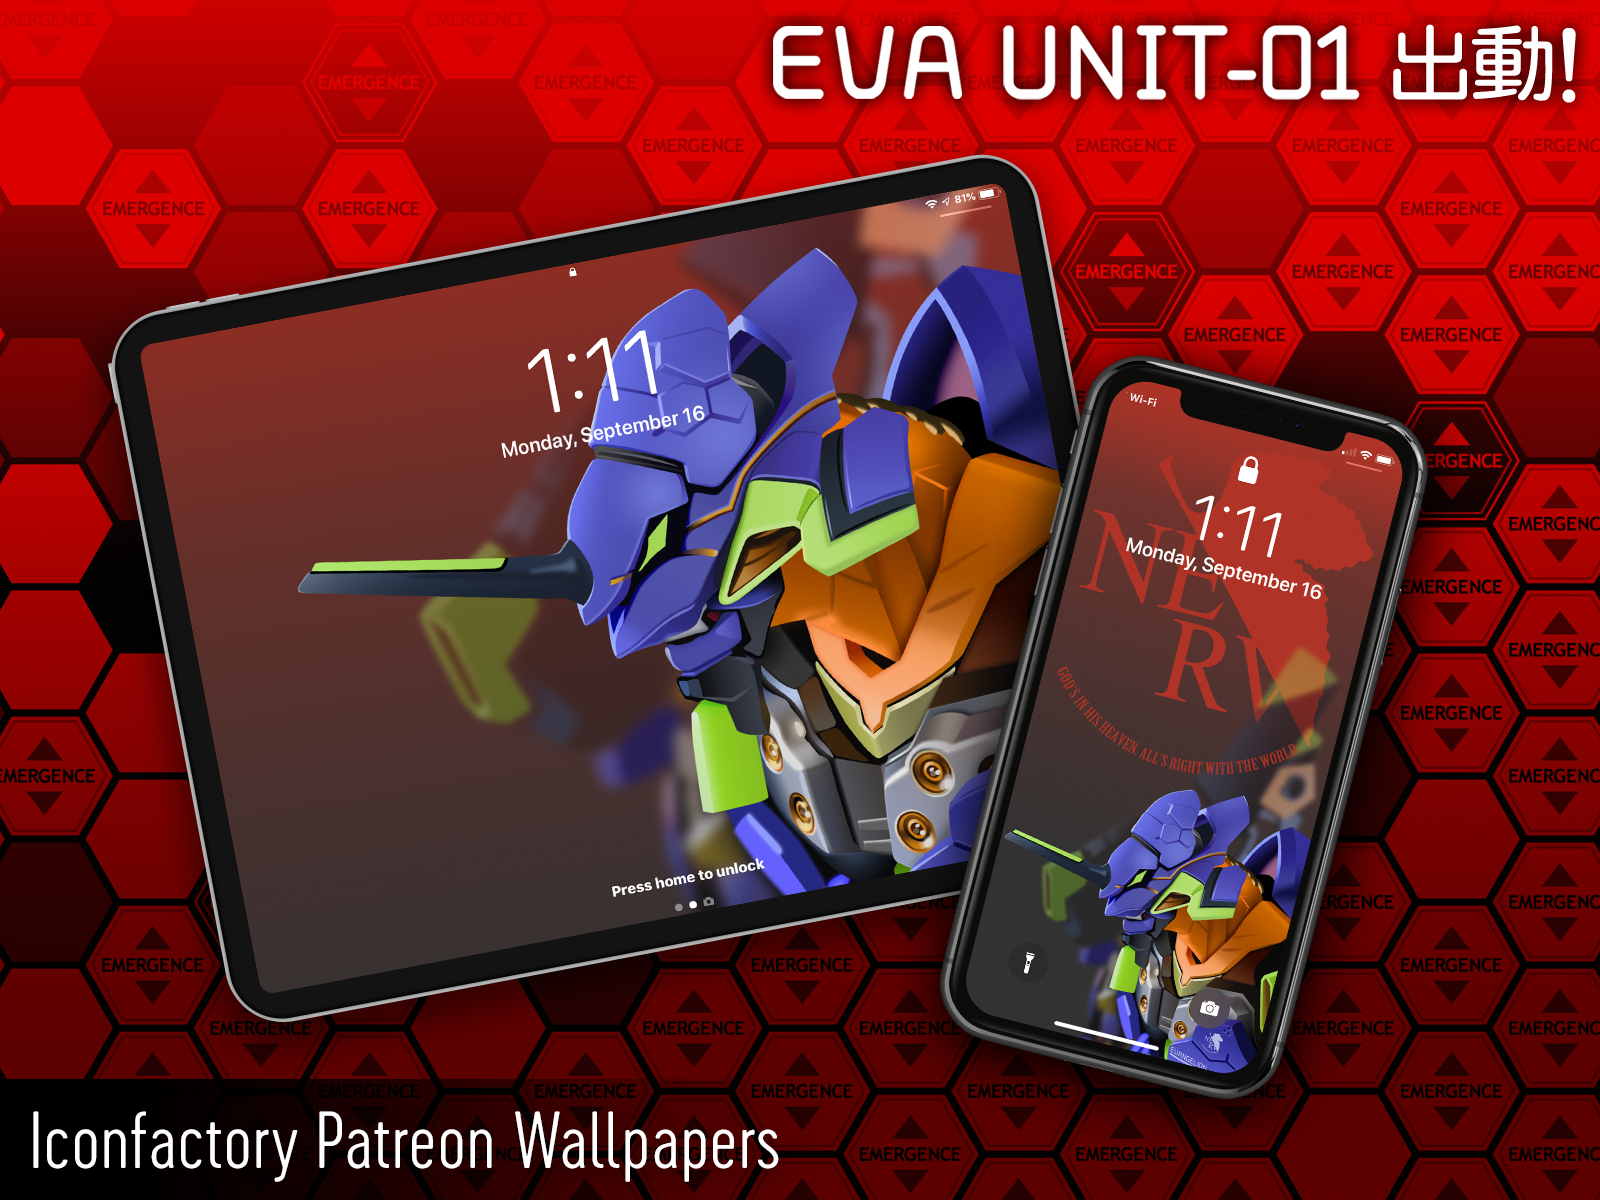 Evangelion Unit 01 Wallpaper By Iconfactory On Dribbble